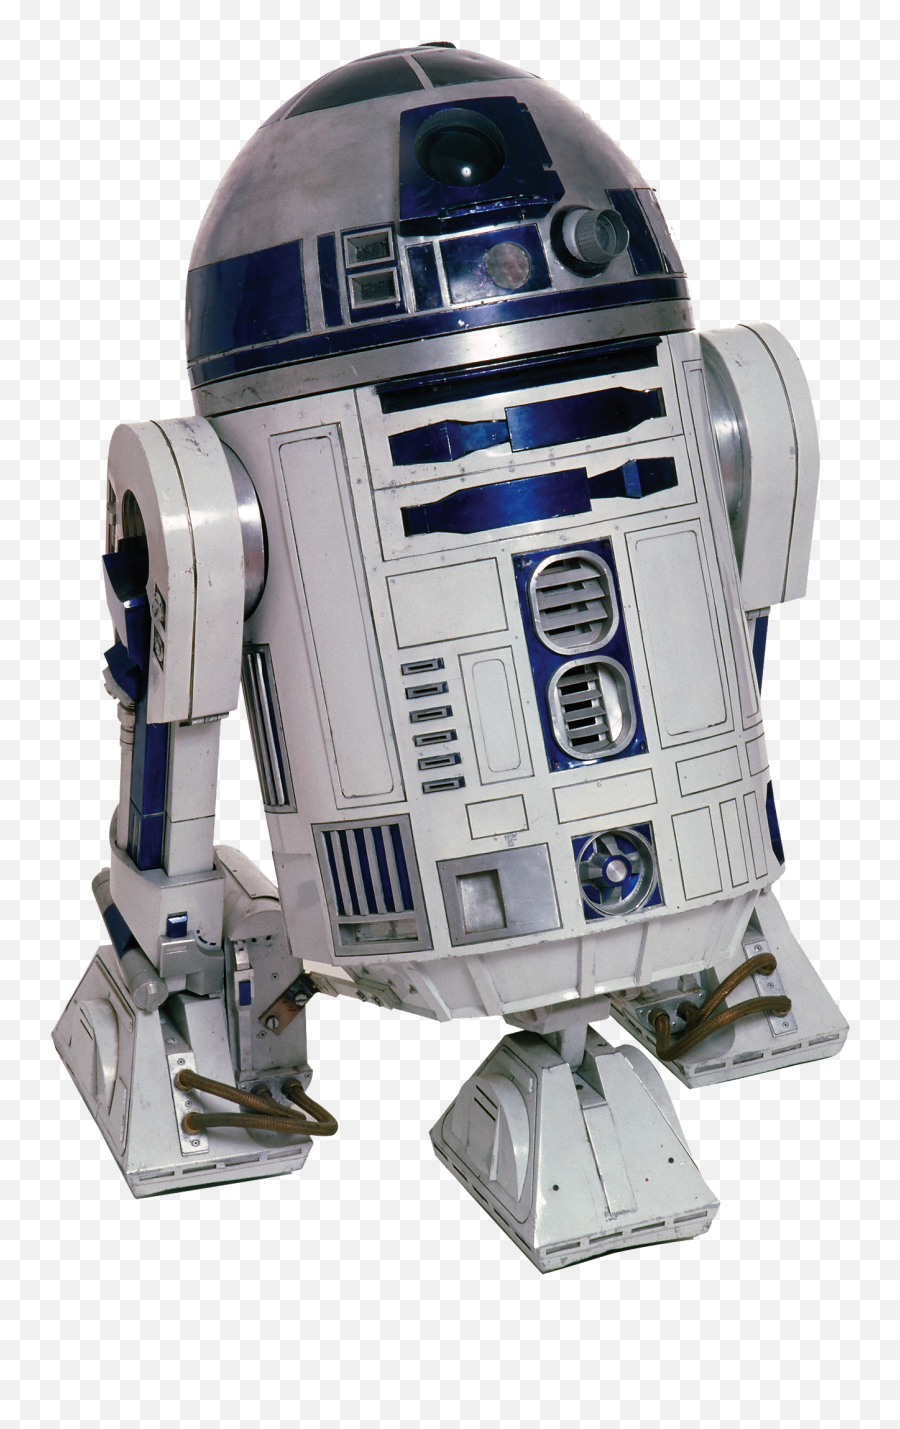 Download Star Wars Png Photos For Designing Projects - Free Star Wars R2d2 Png,Star Wars Transparent Png